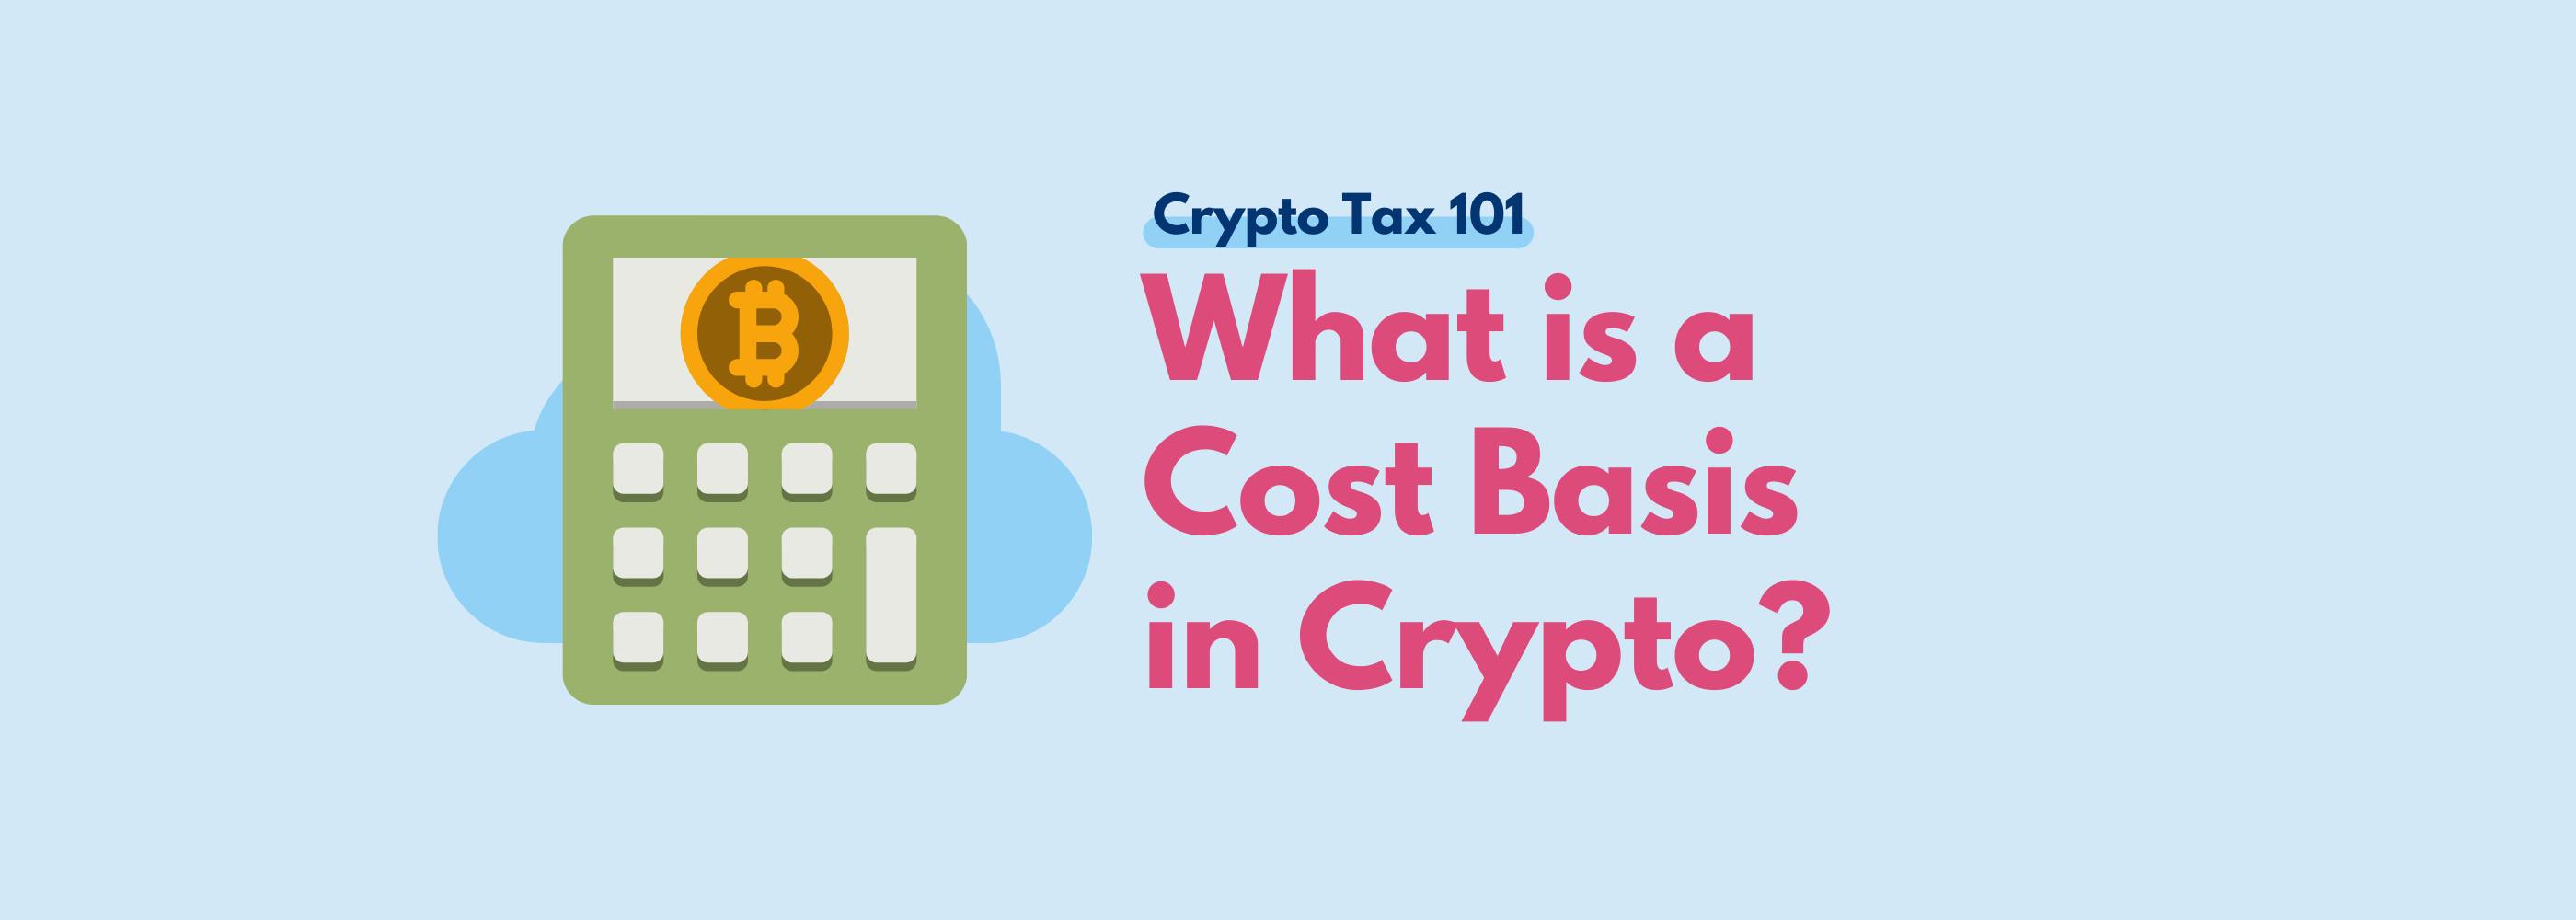 How To Calculate Cost Basis in Crypto & Bitcoin | Koinly